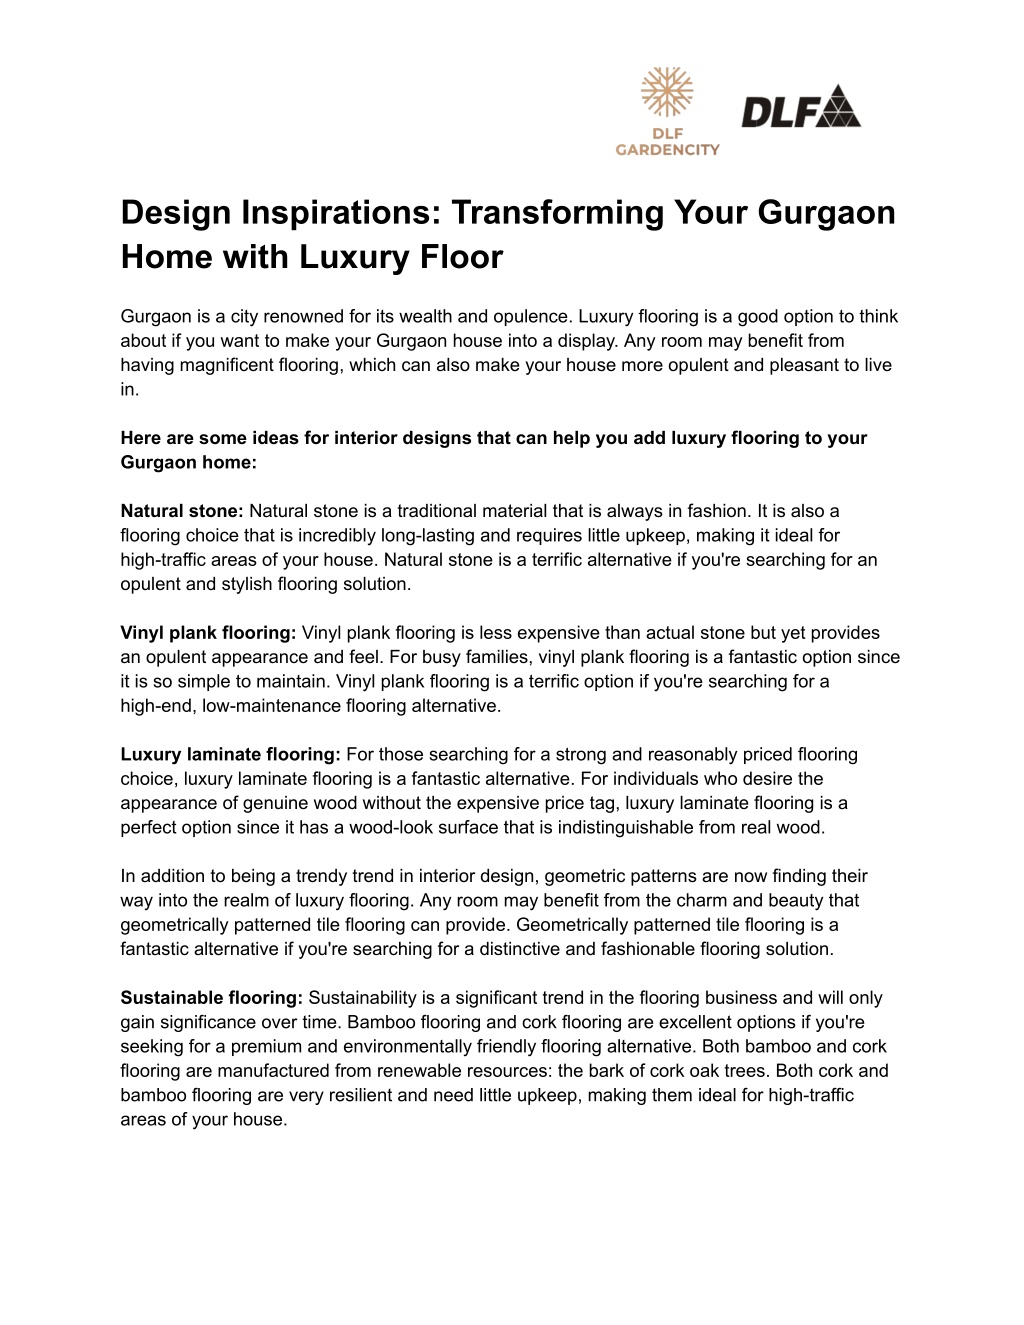 PPT - Design Inspirations: Transforming Your Gurgaon Home with Luxury ...